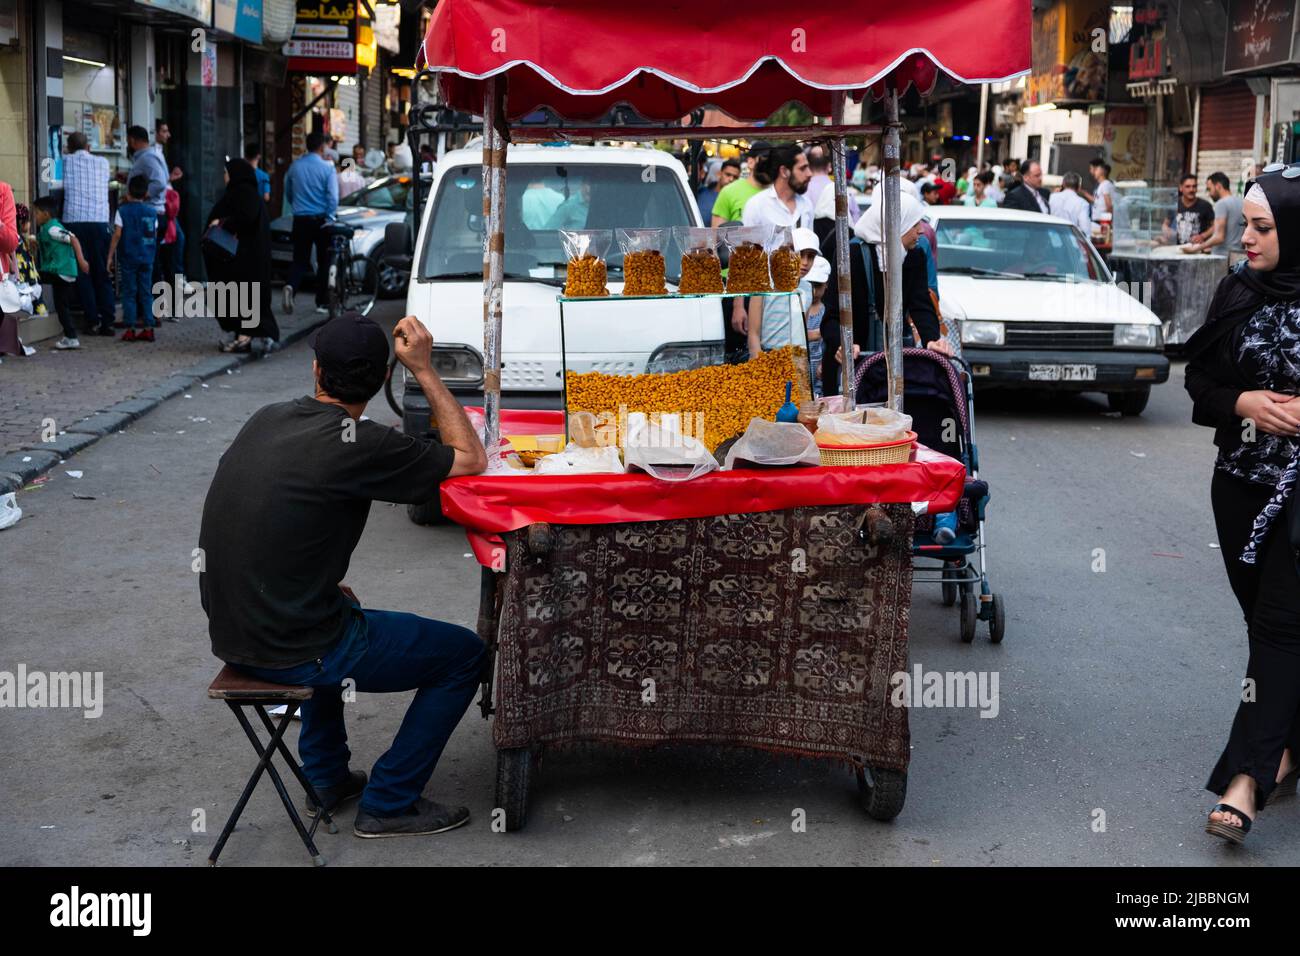 Damascus, Syria - May, 2022: Street seller selling corn snack Stock Photo